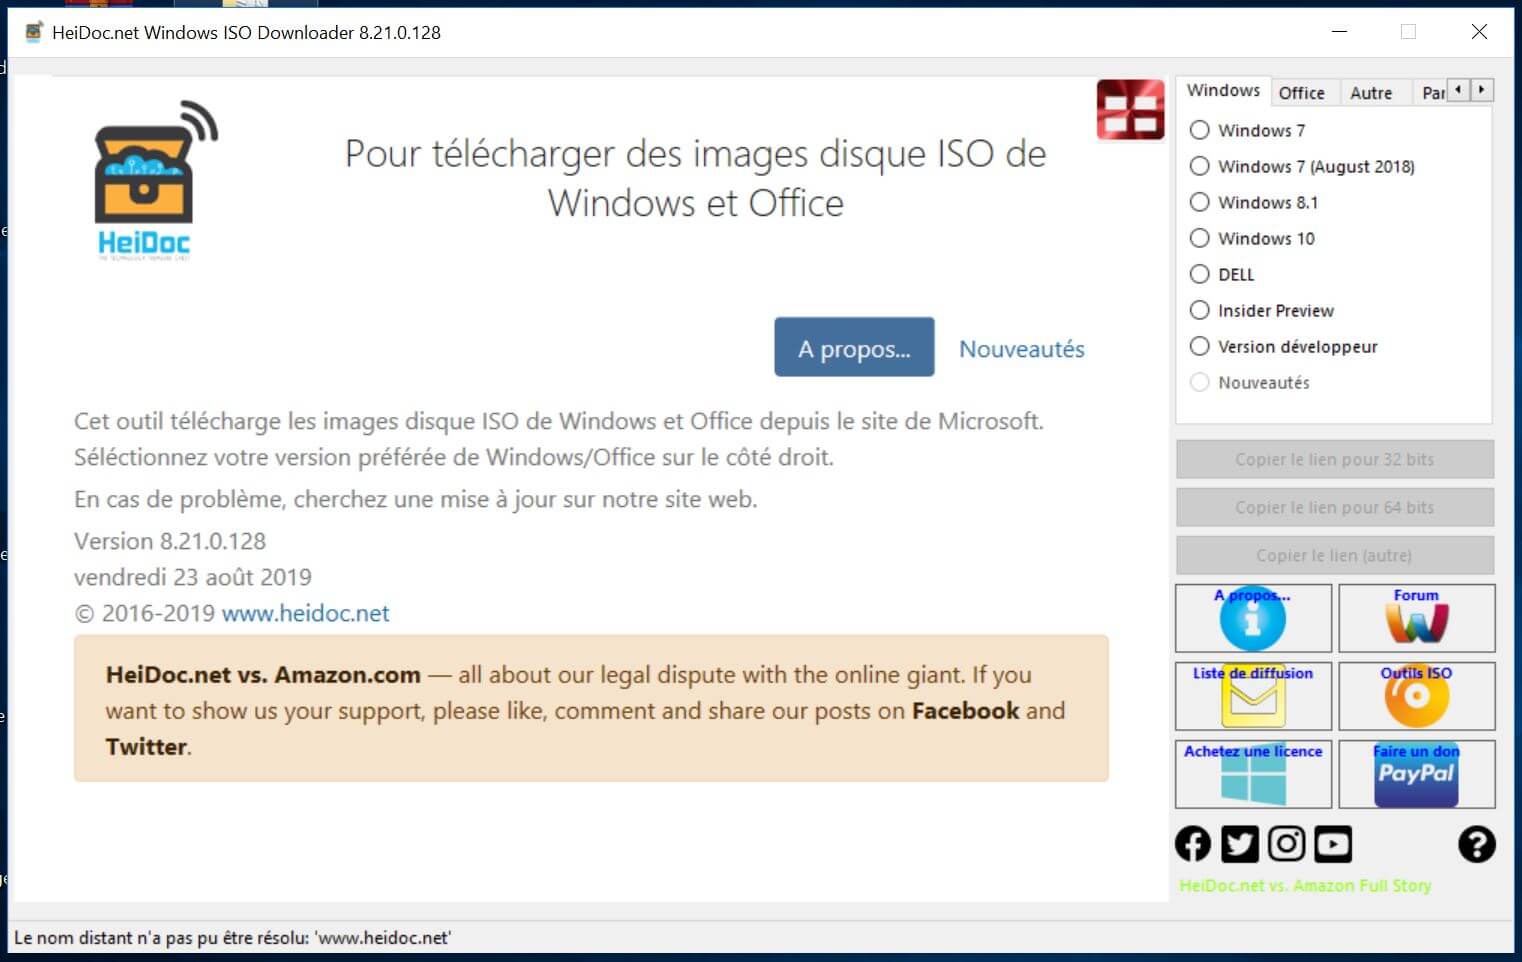 Microsoft Windows and Office ISO Download Tool